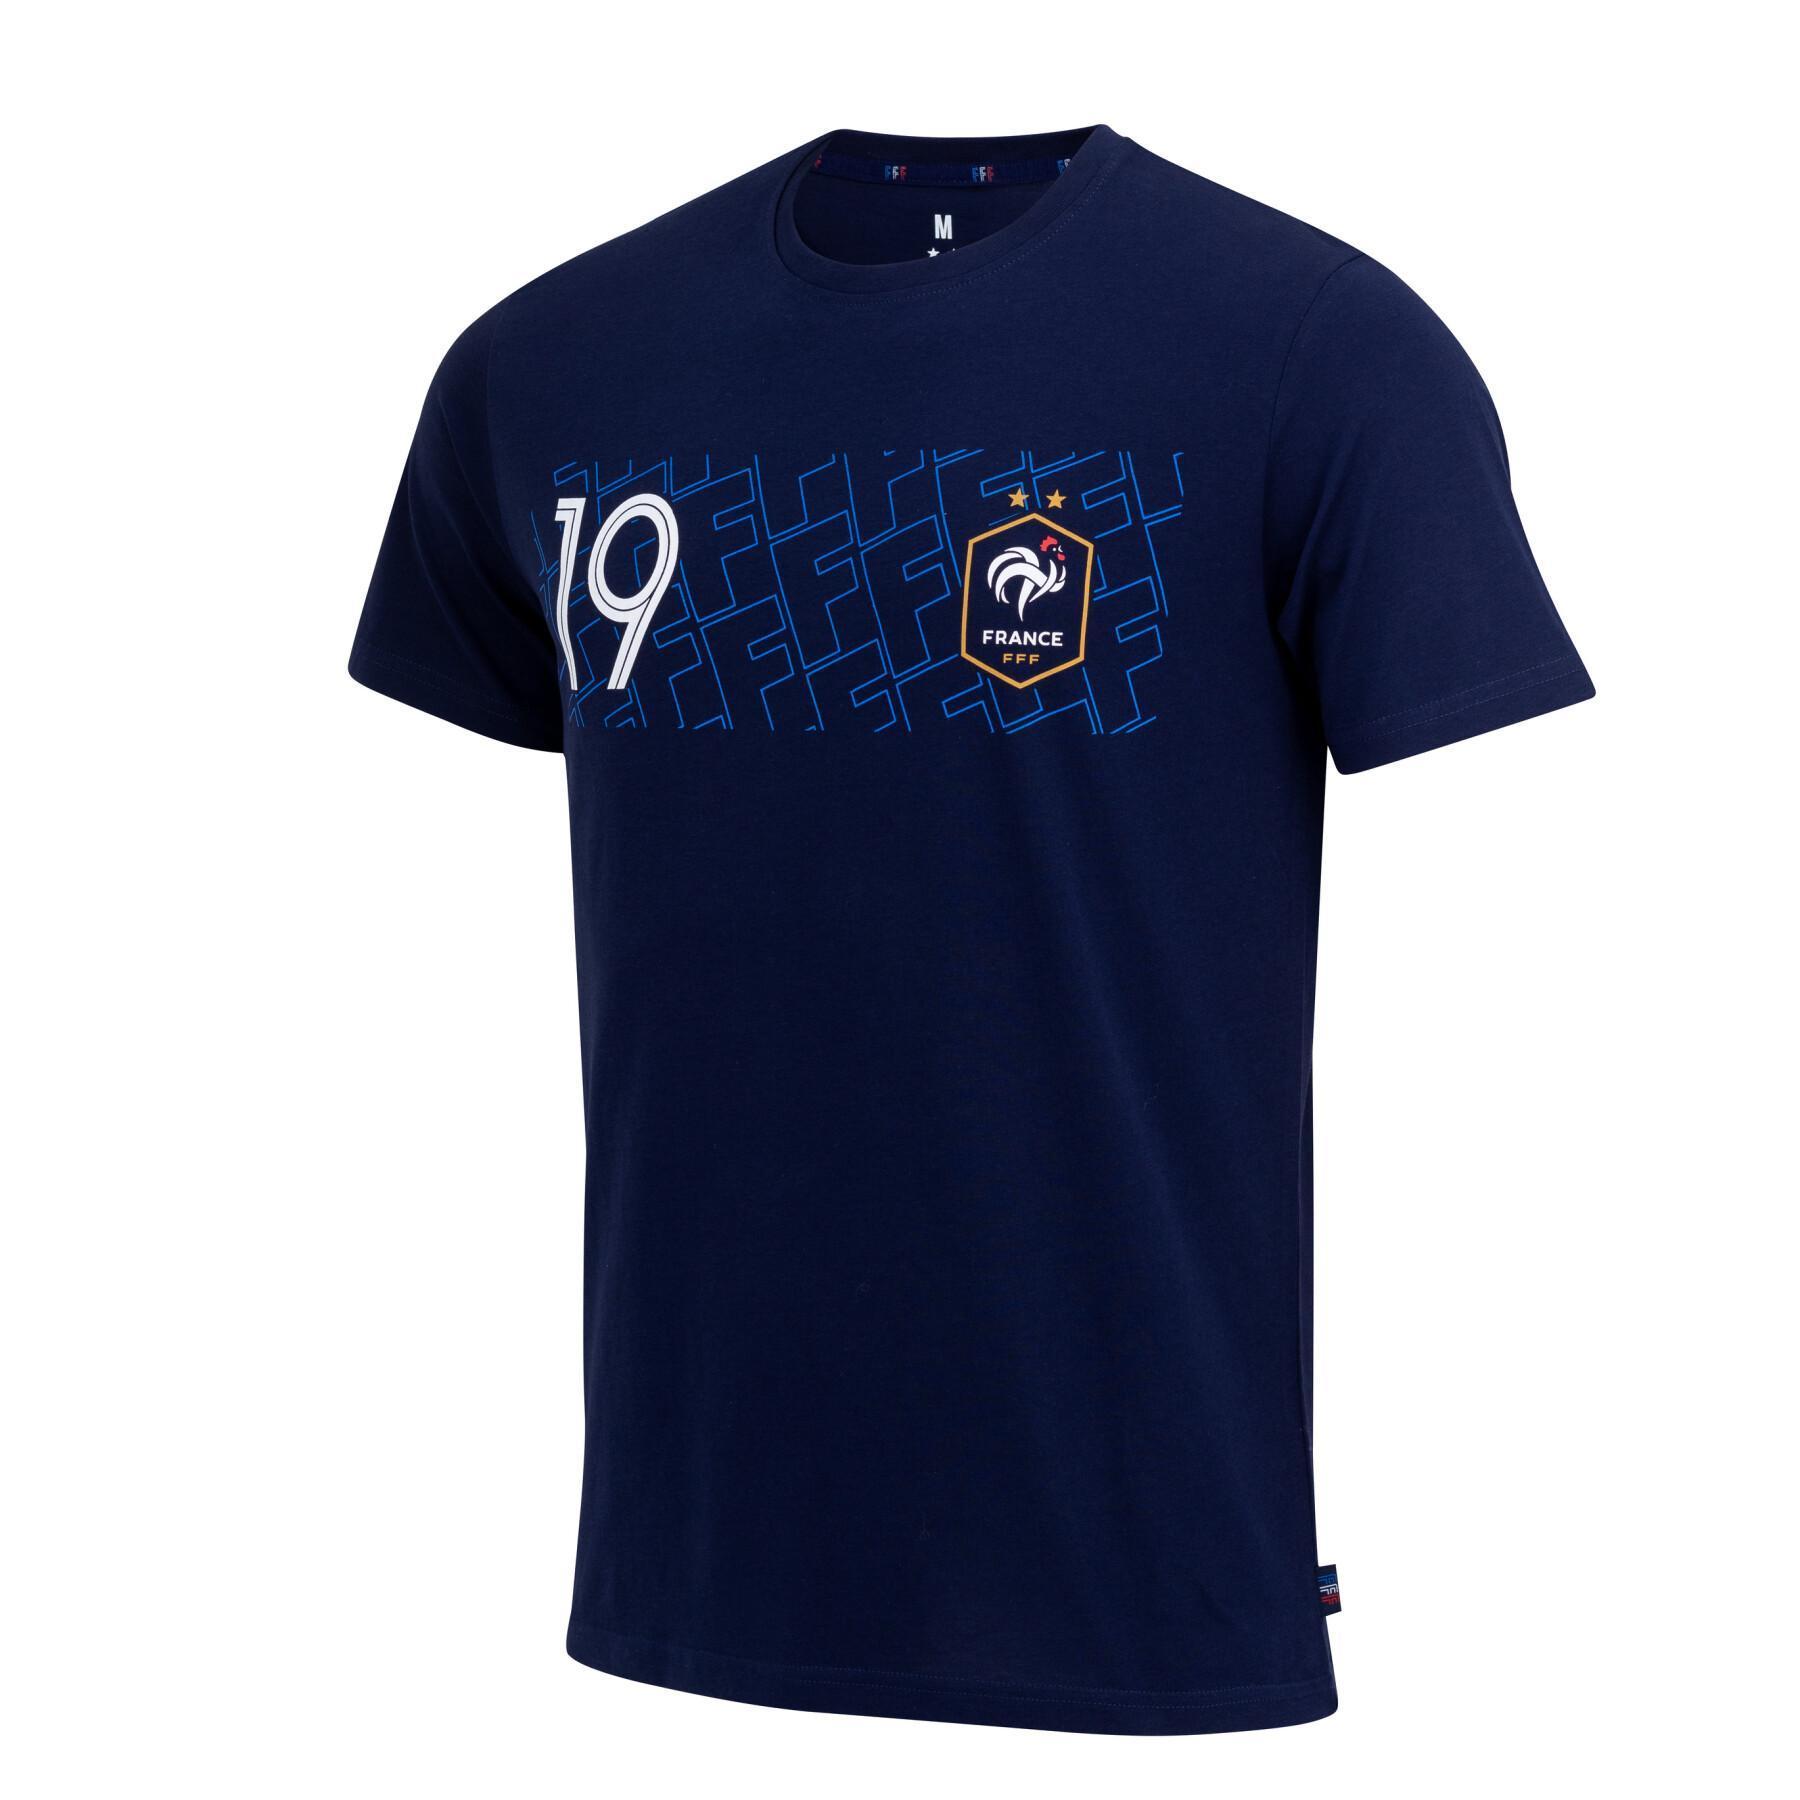 Team T-shirt from France Benzema 2022/23